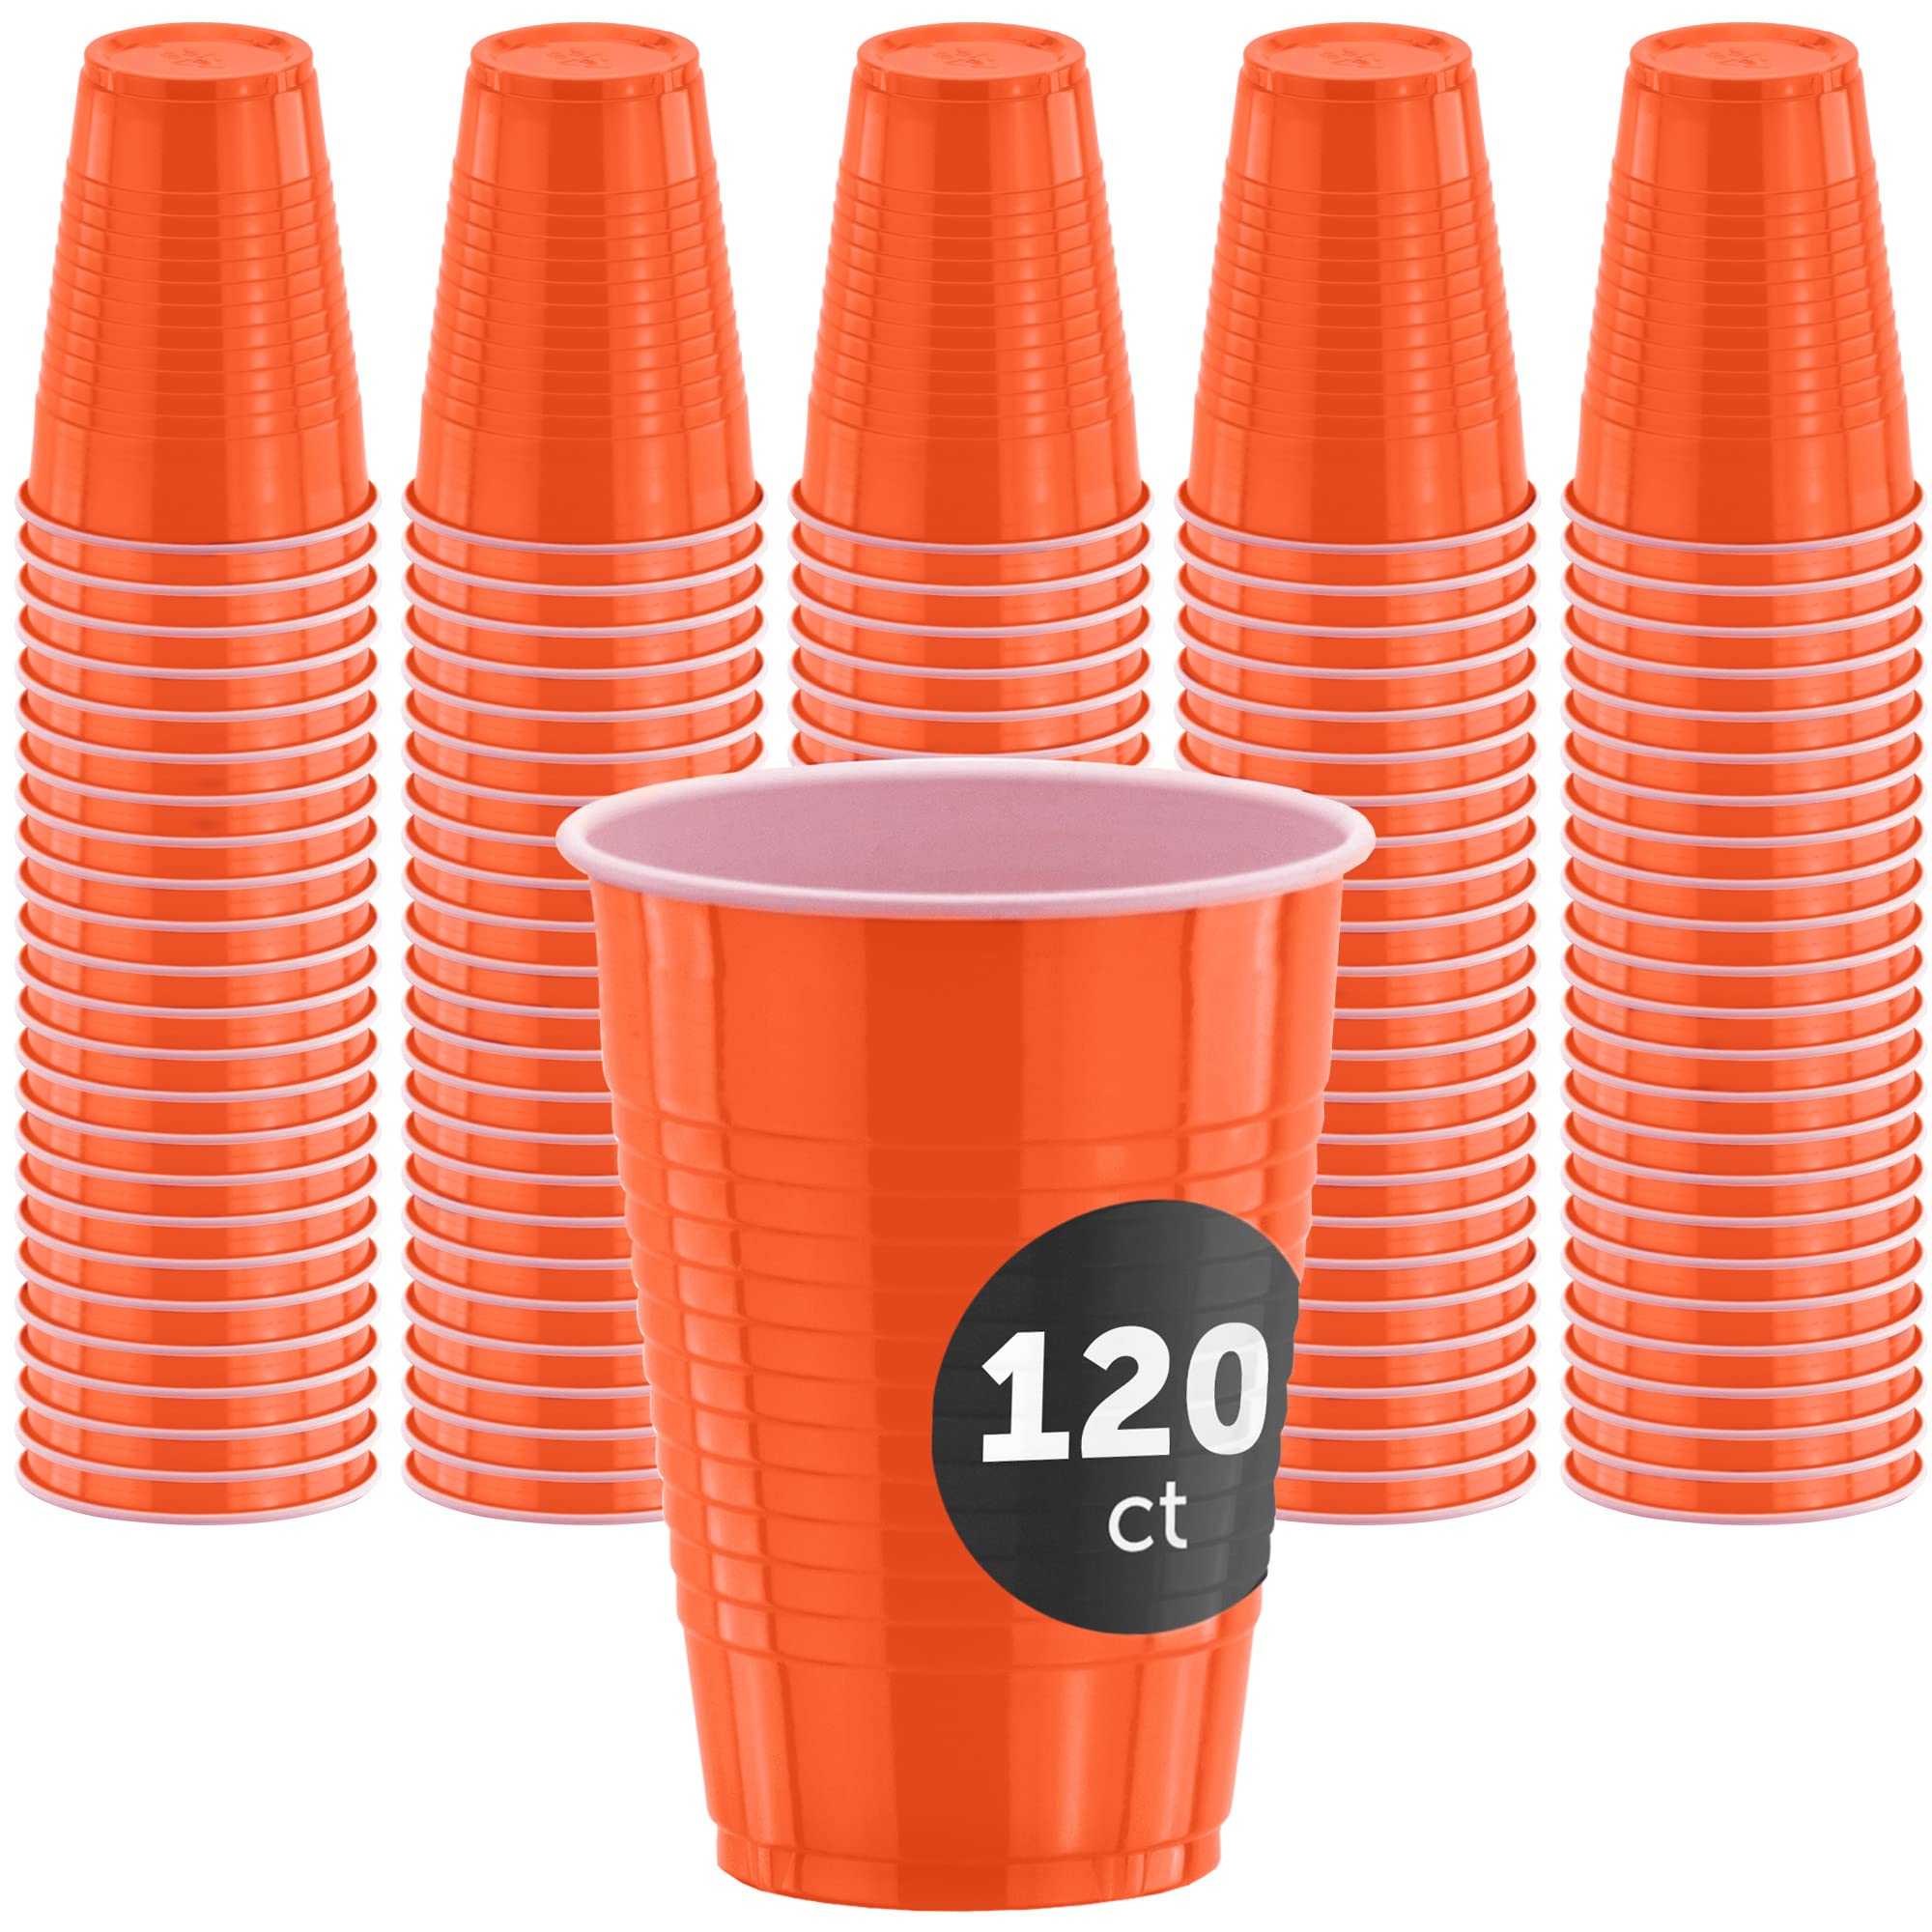 Decorrack 40 Party Cups 12 oz Reusable Disposable Cups for Birthday Party Bachelorette Camping Indoor Outdoor Events Beverage Drinking Cups (Red, 40)